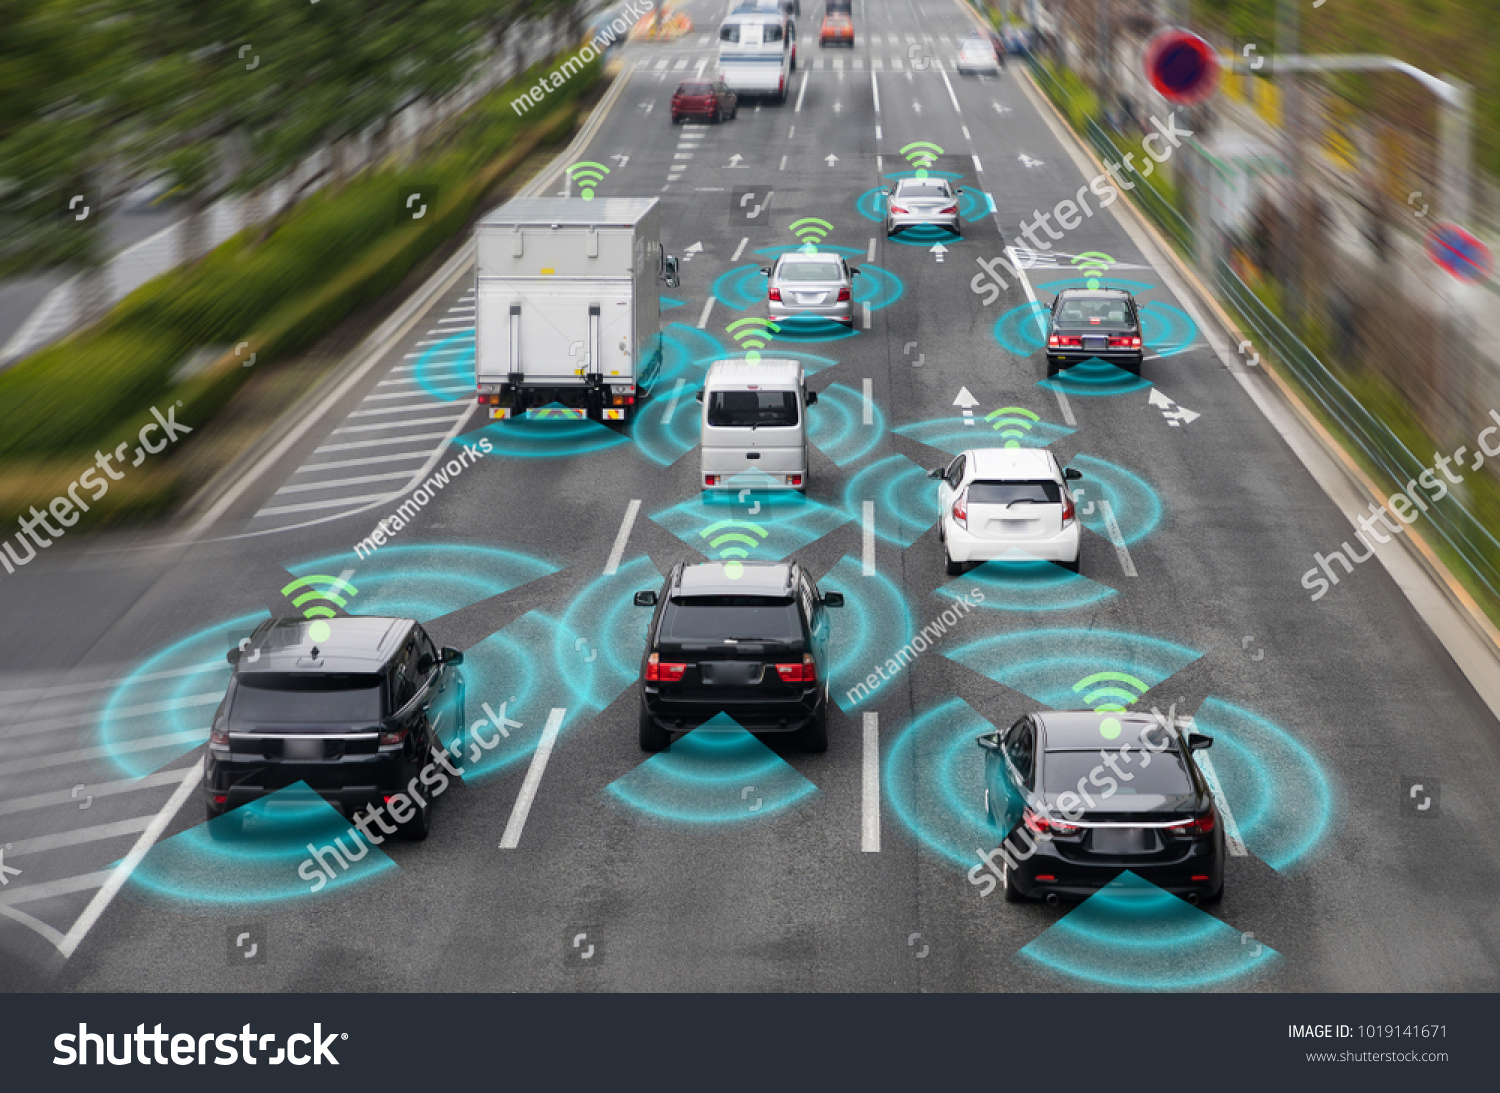 Sensing system and wireless communication network of vehicle. Autonomous car. Driverless car. Self driving vehicle. #1019141671